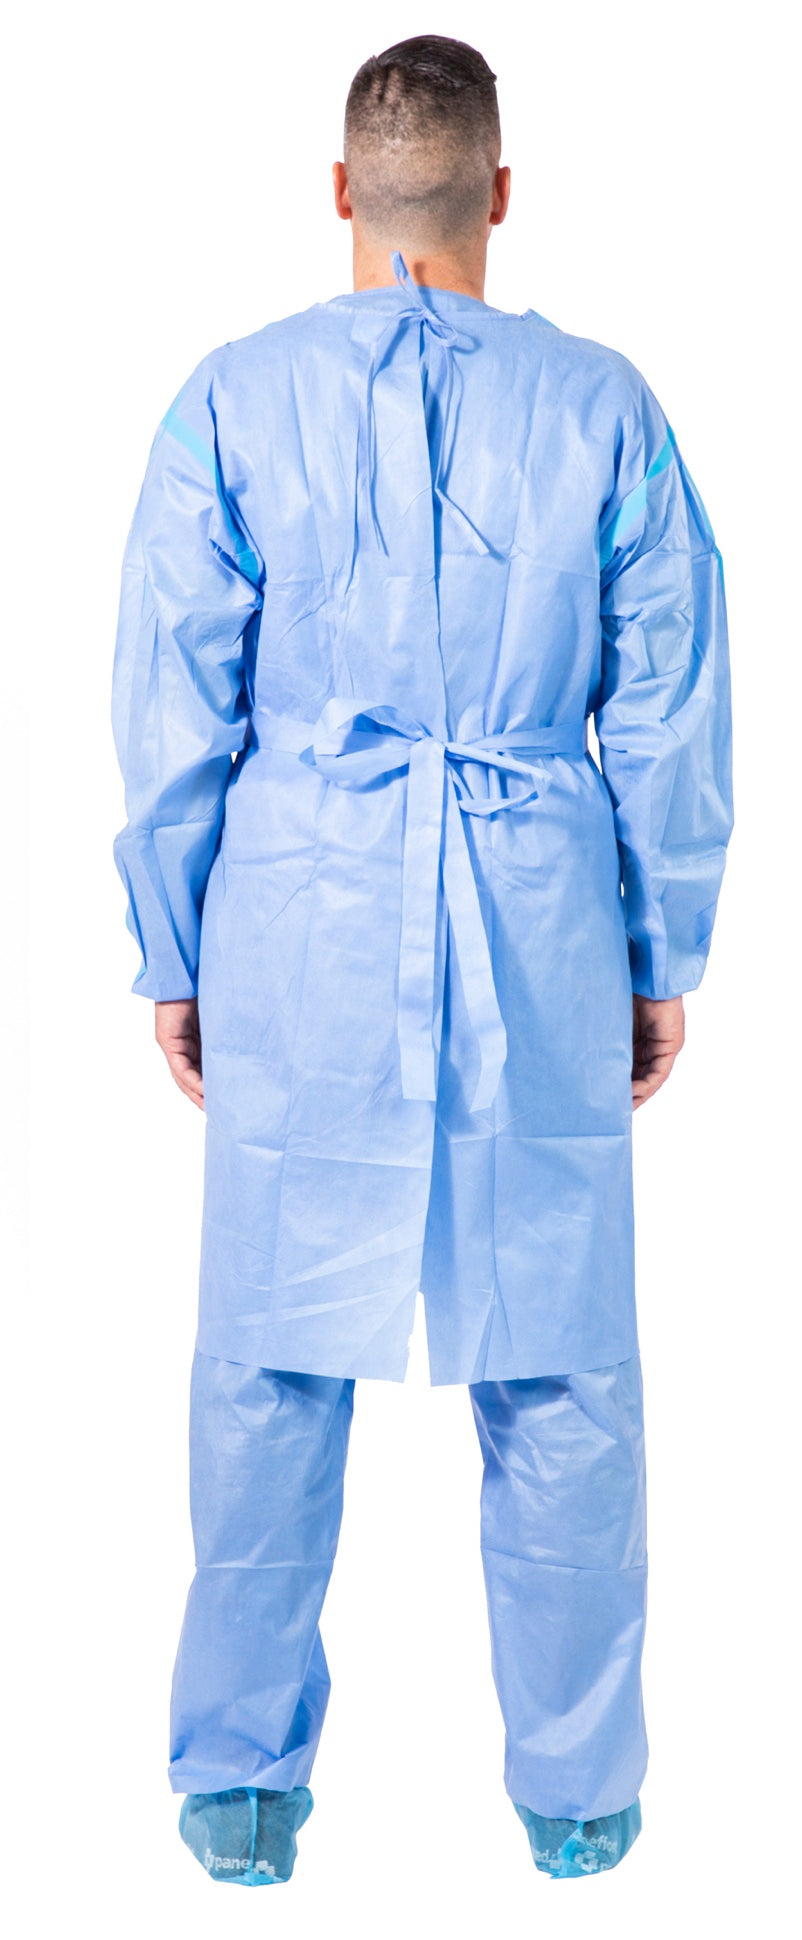 Level 4 Medical Surgical Isolation Gown